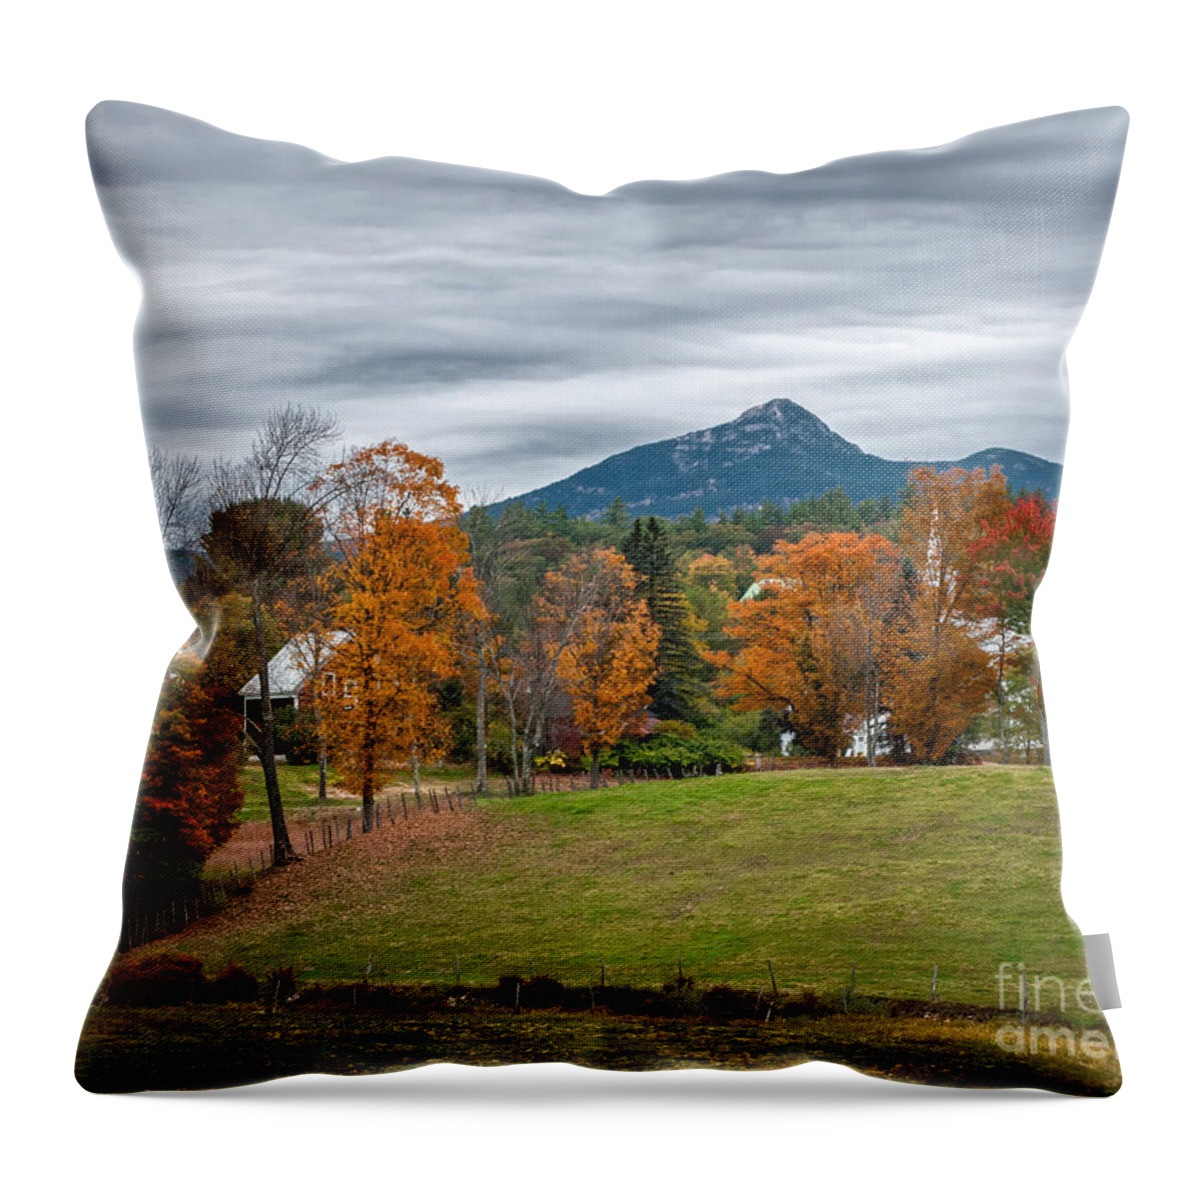 New Hampshire Throw Pillow featuring the photograph Autumn Chocorua by Scott Thorp